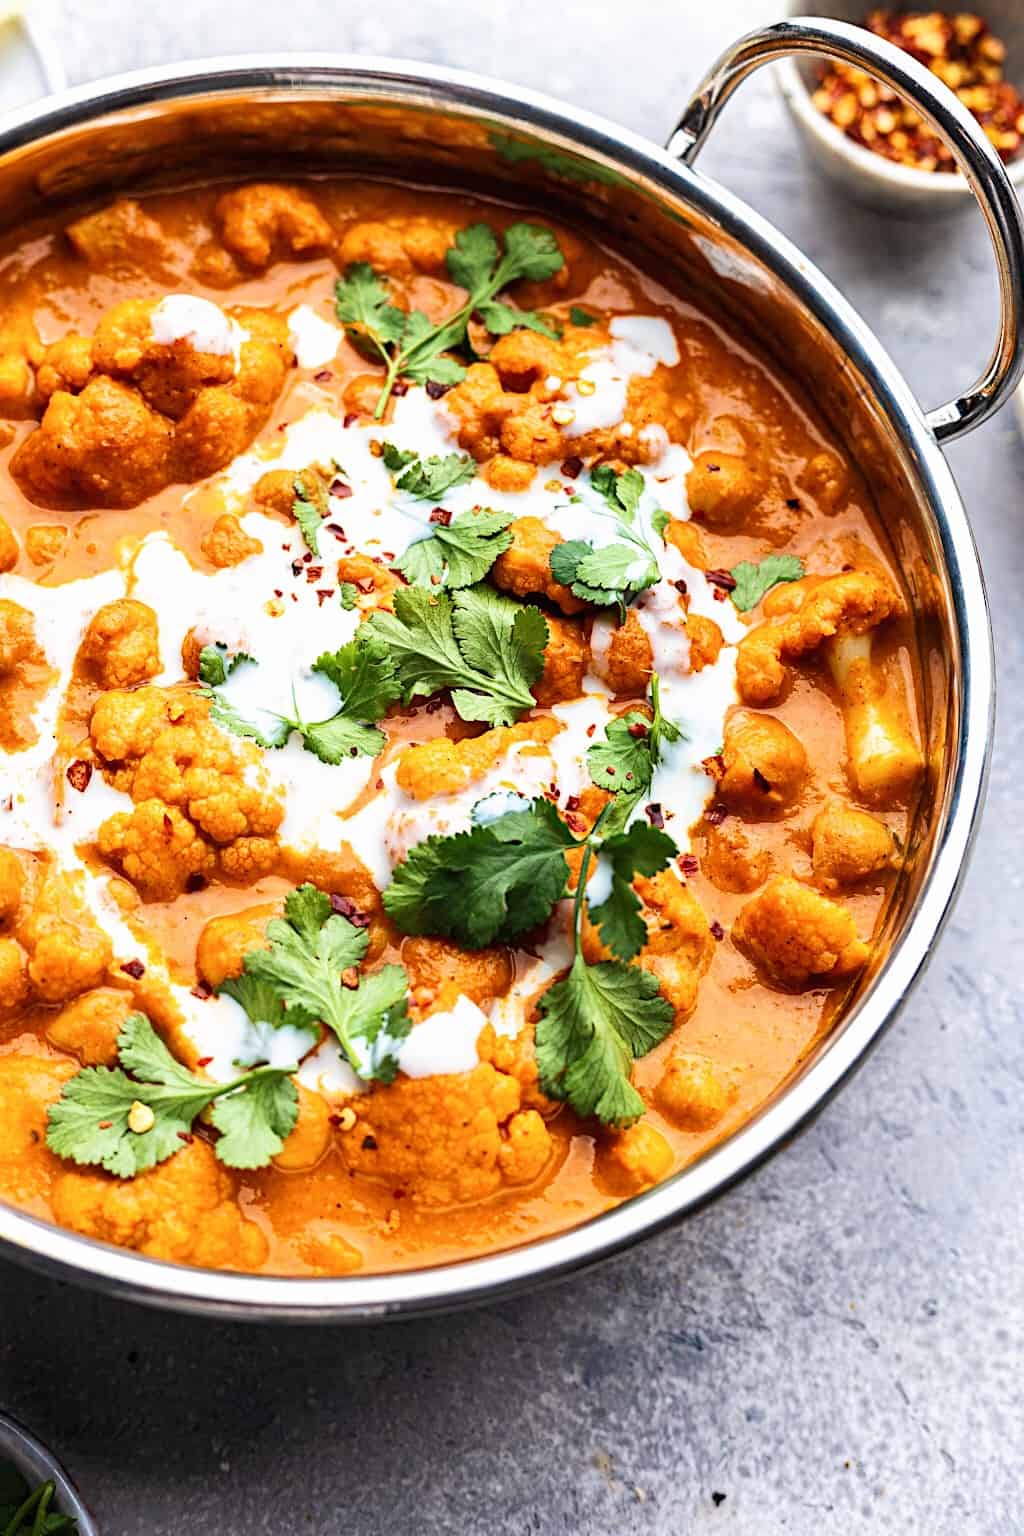 Vegan Cauliflower and Chickpea Curry #curry #cauliflower #chickpea #vegan #healthy #creamy